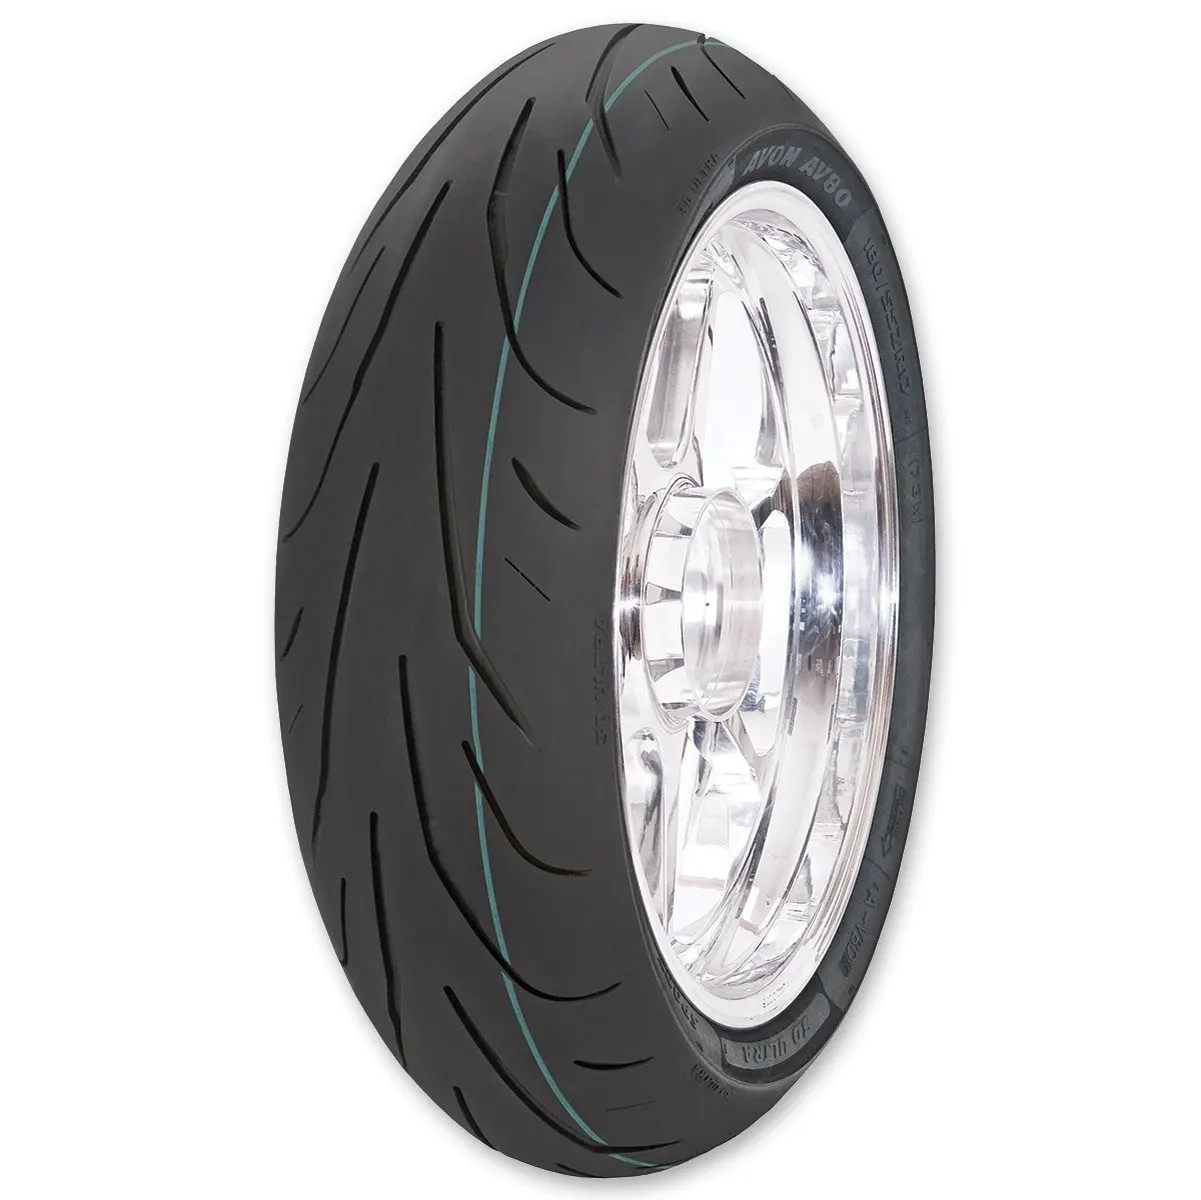 Cheap Avon Motorcycle Tires, find Avon Motorcycle Tires deals on line at Alibaba.com